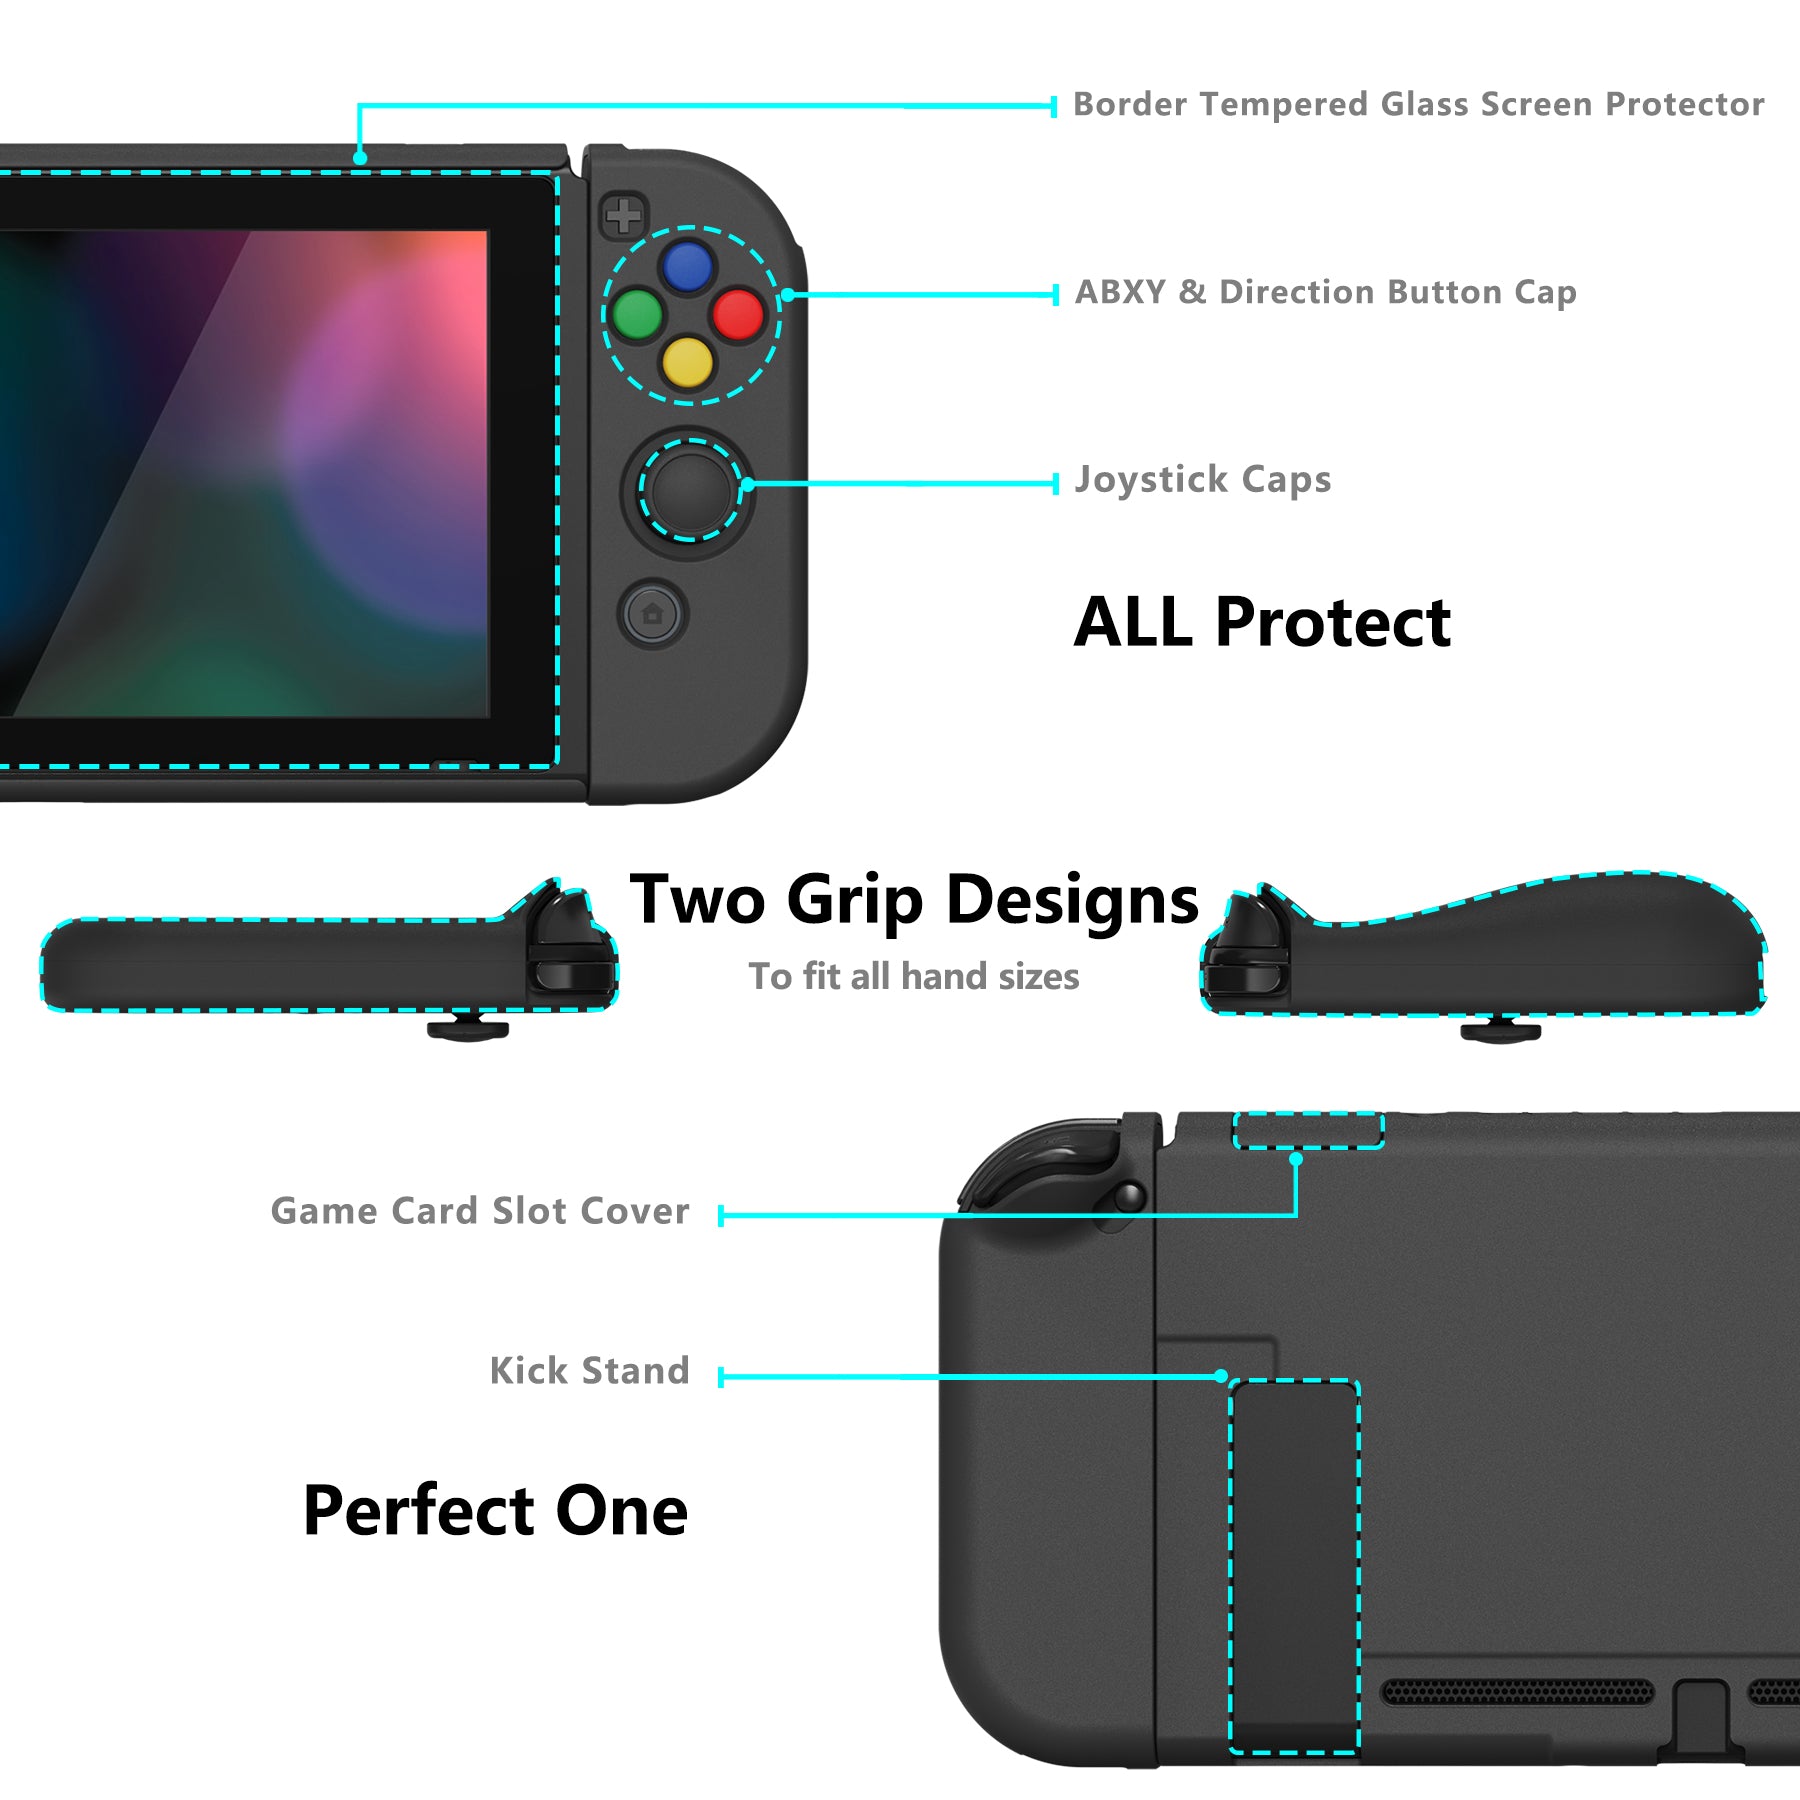 PlayVital AlterGrips Dockable Protective Case Ergonomic Grip Cover for Nintendo Switch, Interchangeable Joycon Cover w/Screen Protector & Thumb Grip Caps & Button Caps - Black - TNSYP3011 playvital